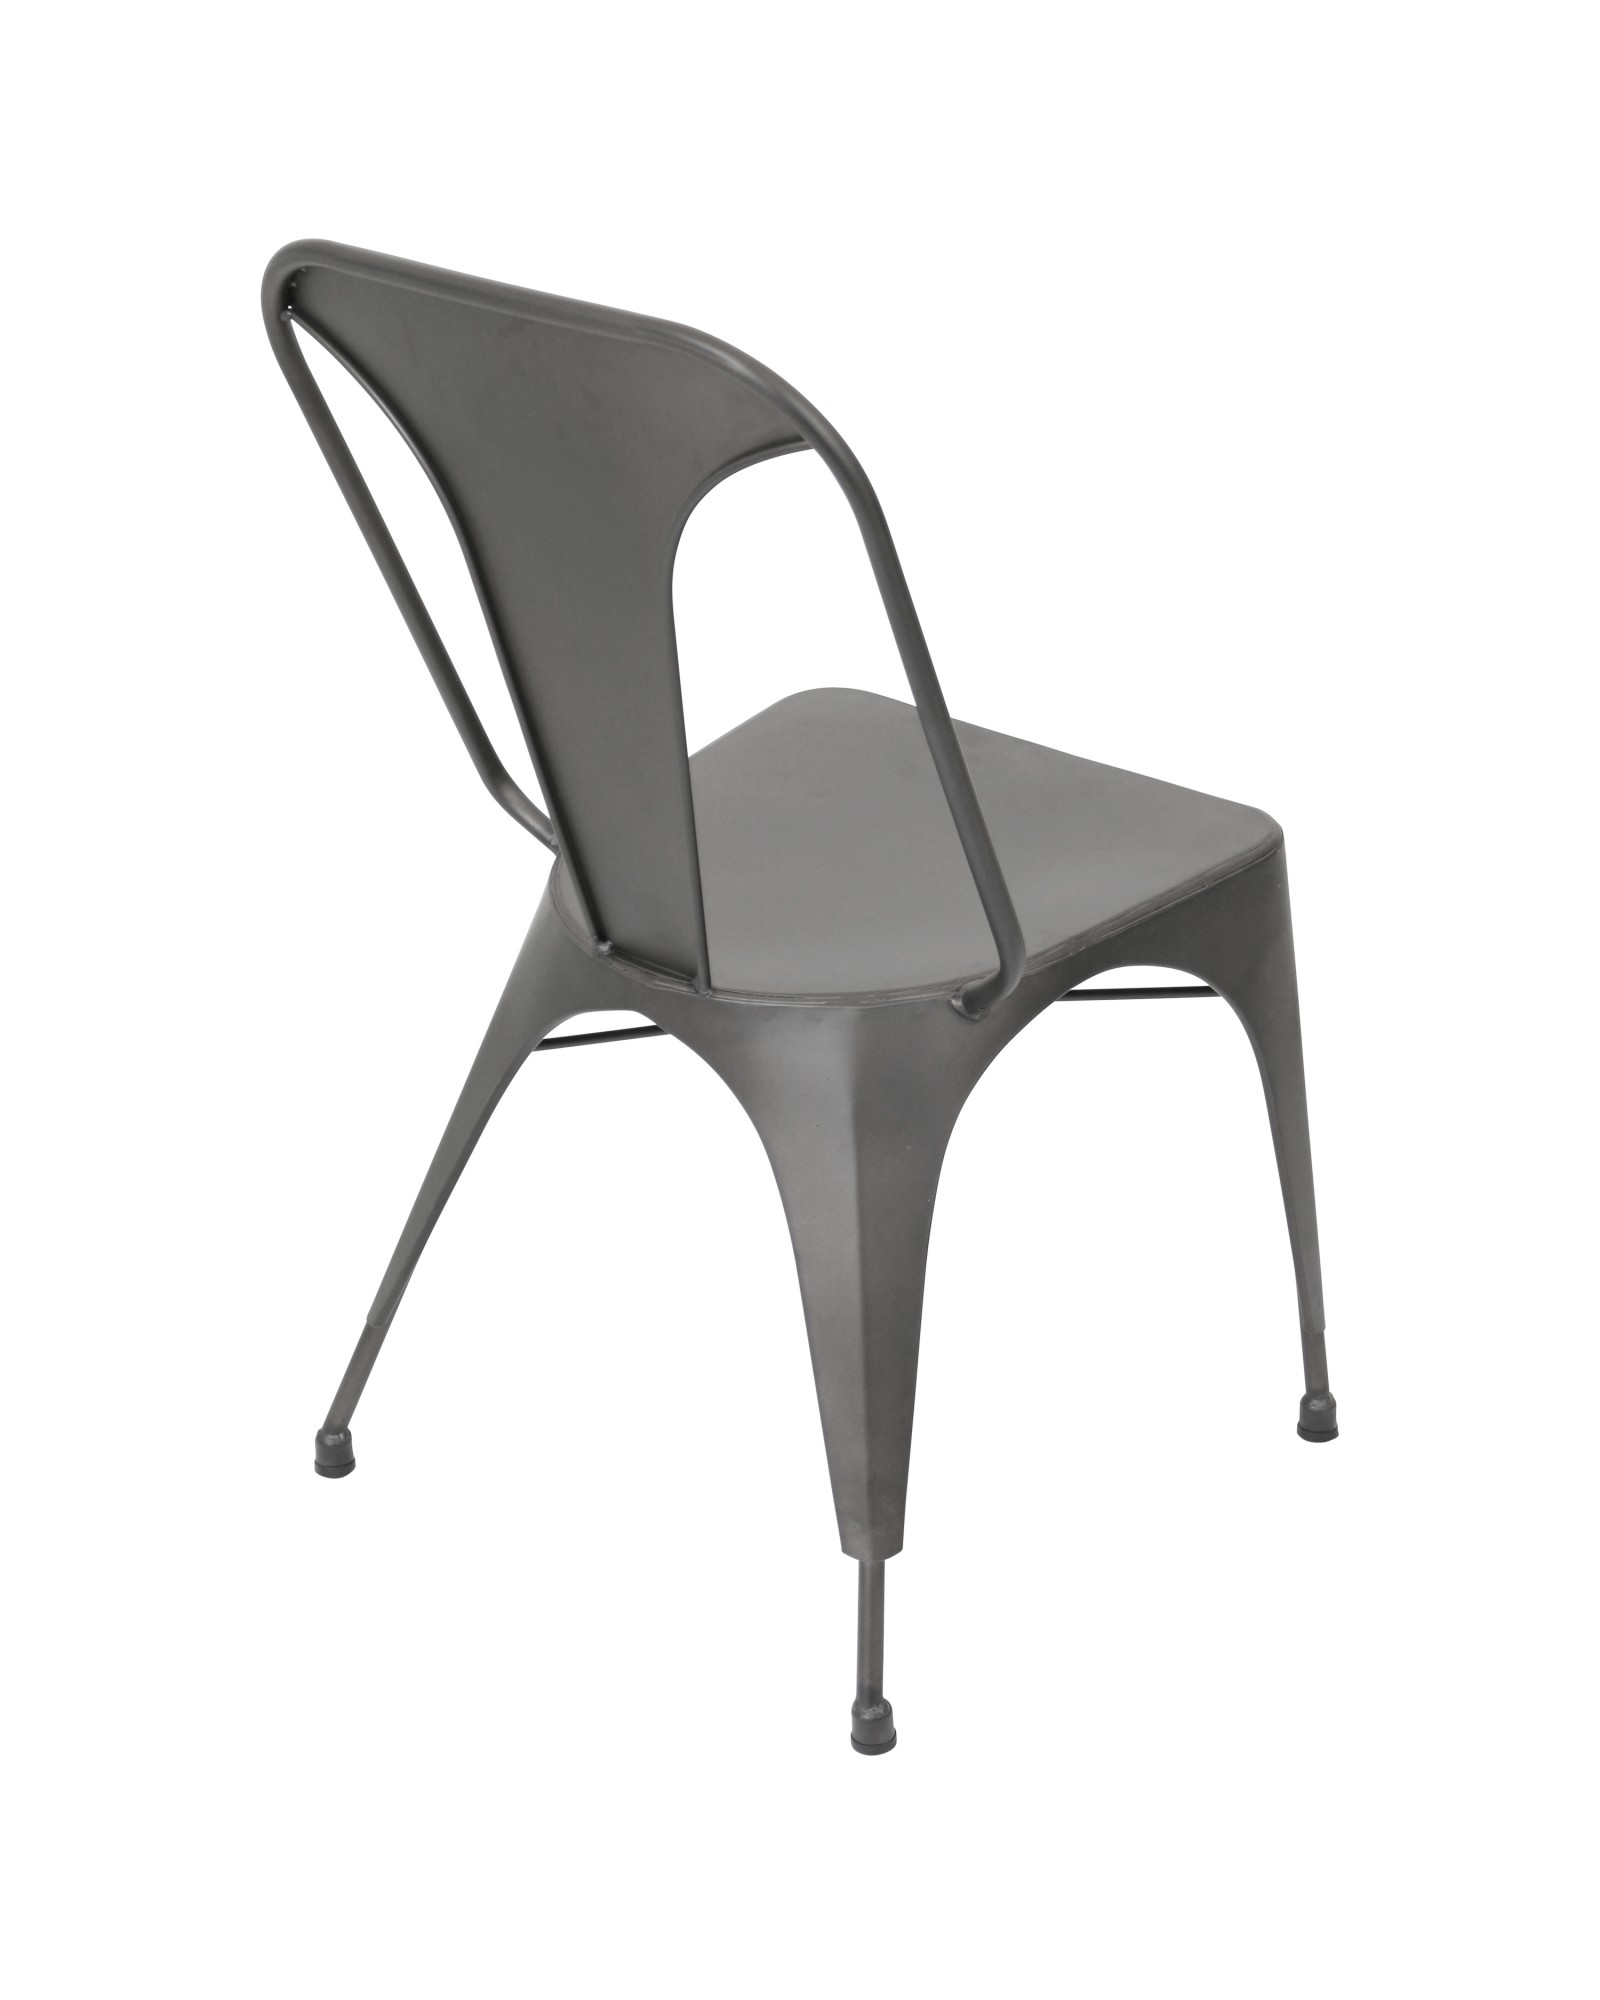 Austin Industrial Dining Chair in Matte Grey - Set of 2